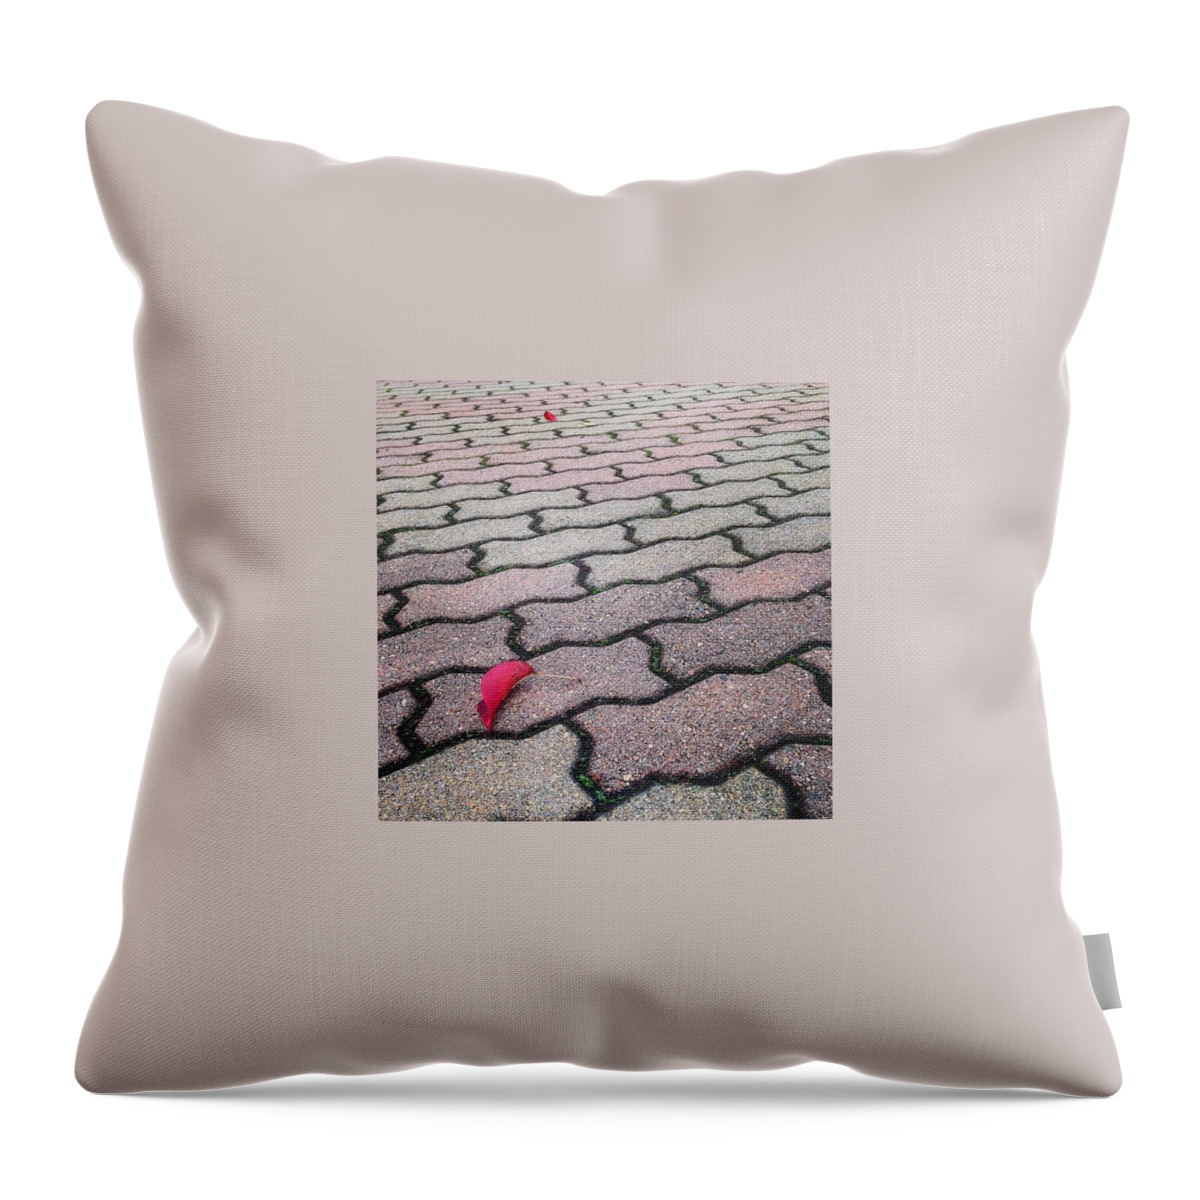 Leaves Throw Pillow featuring the photograph Red Leaves by Alison Photography